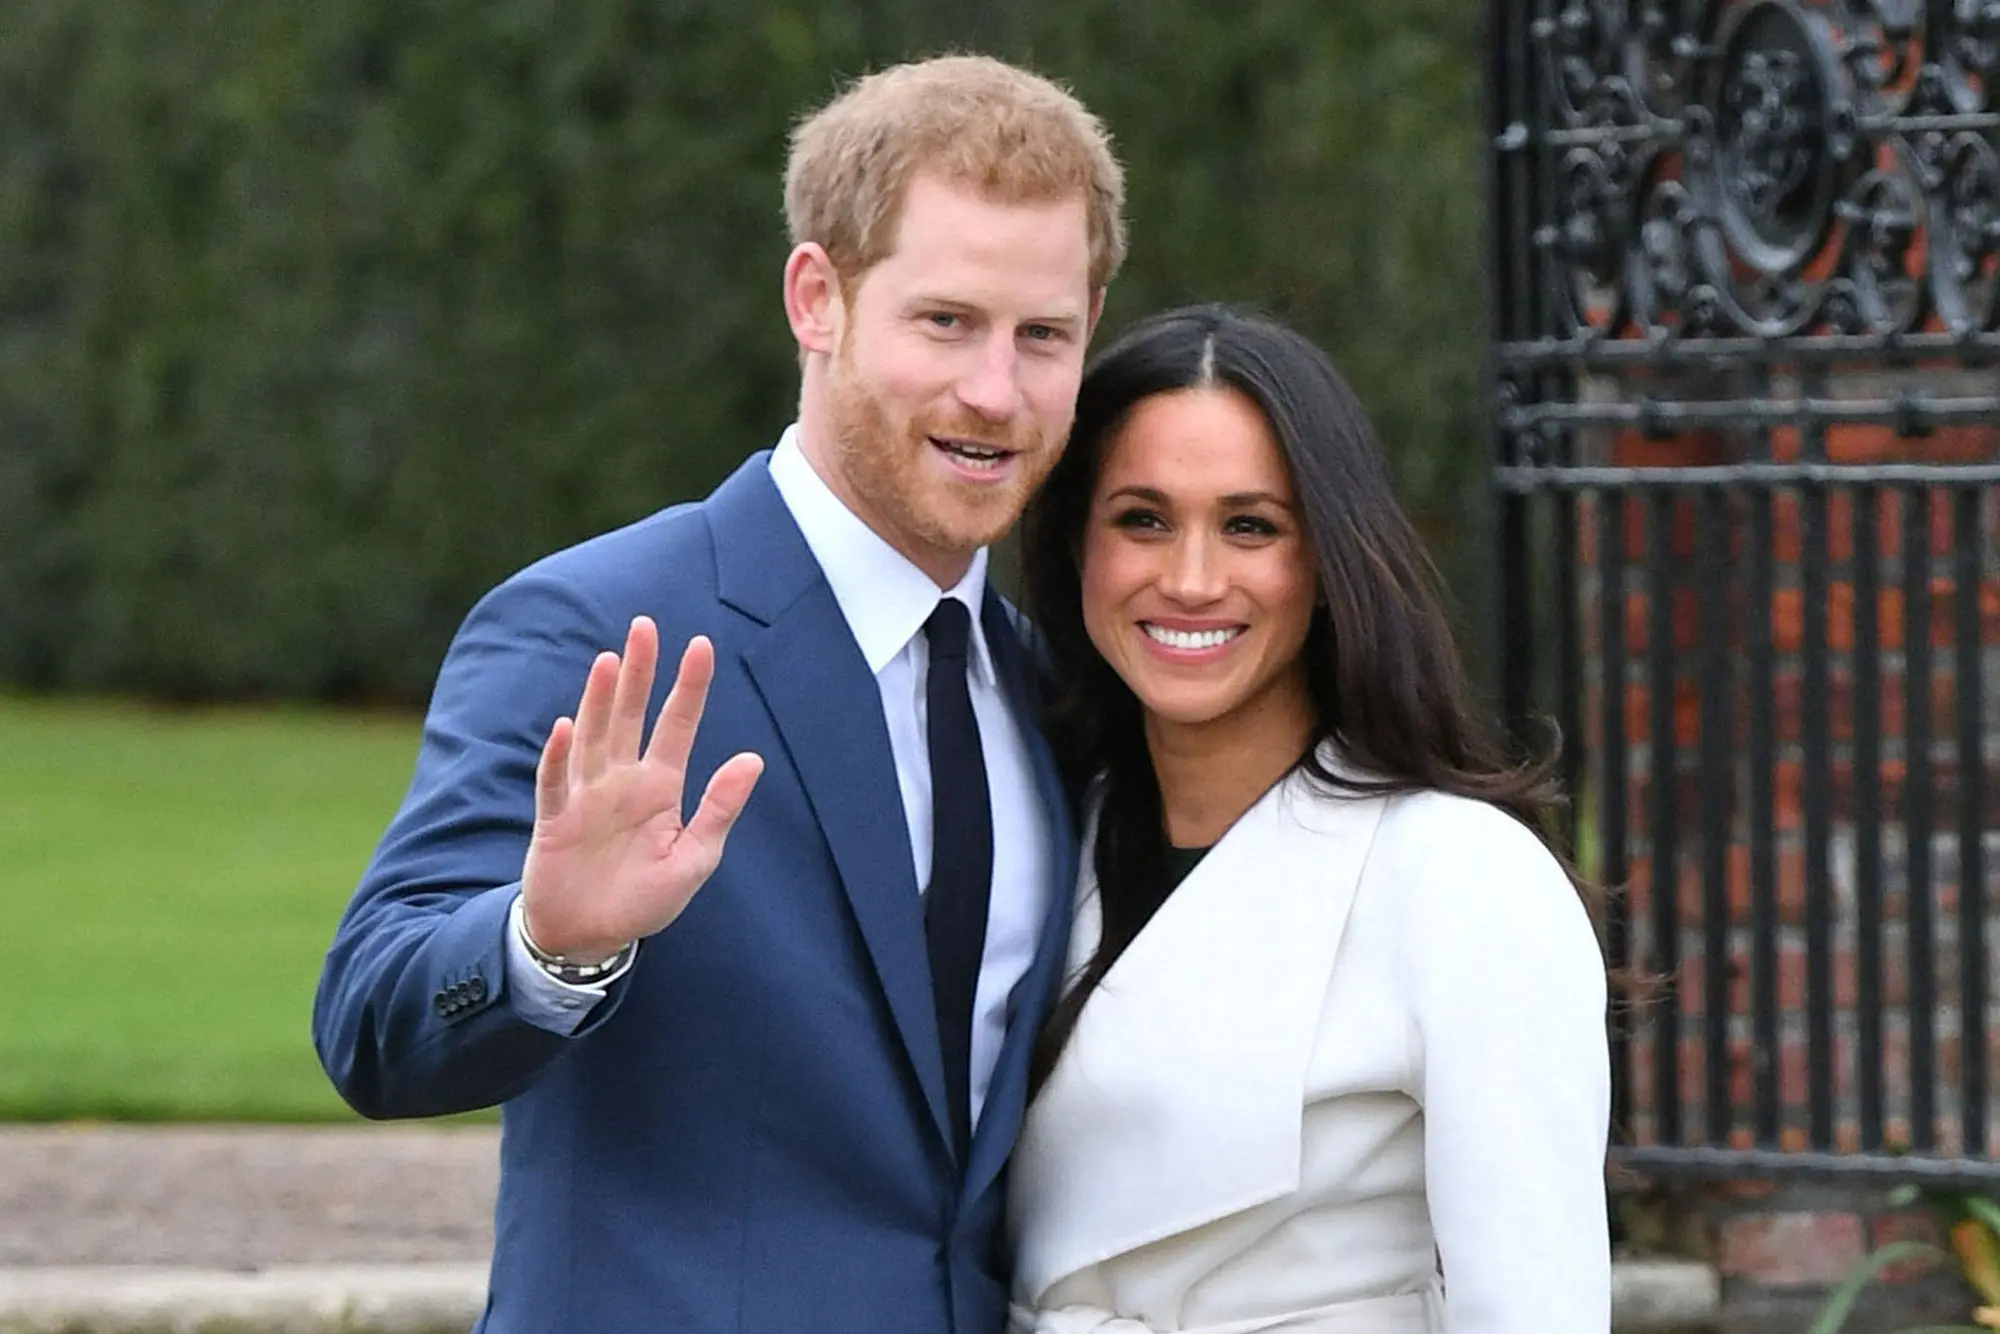 Prince Harry and Meghan Markle faces criticism; labeled as “insensitive” by royal observer